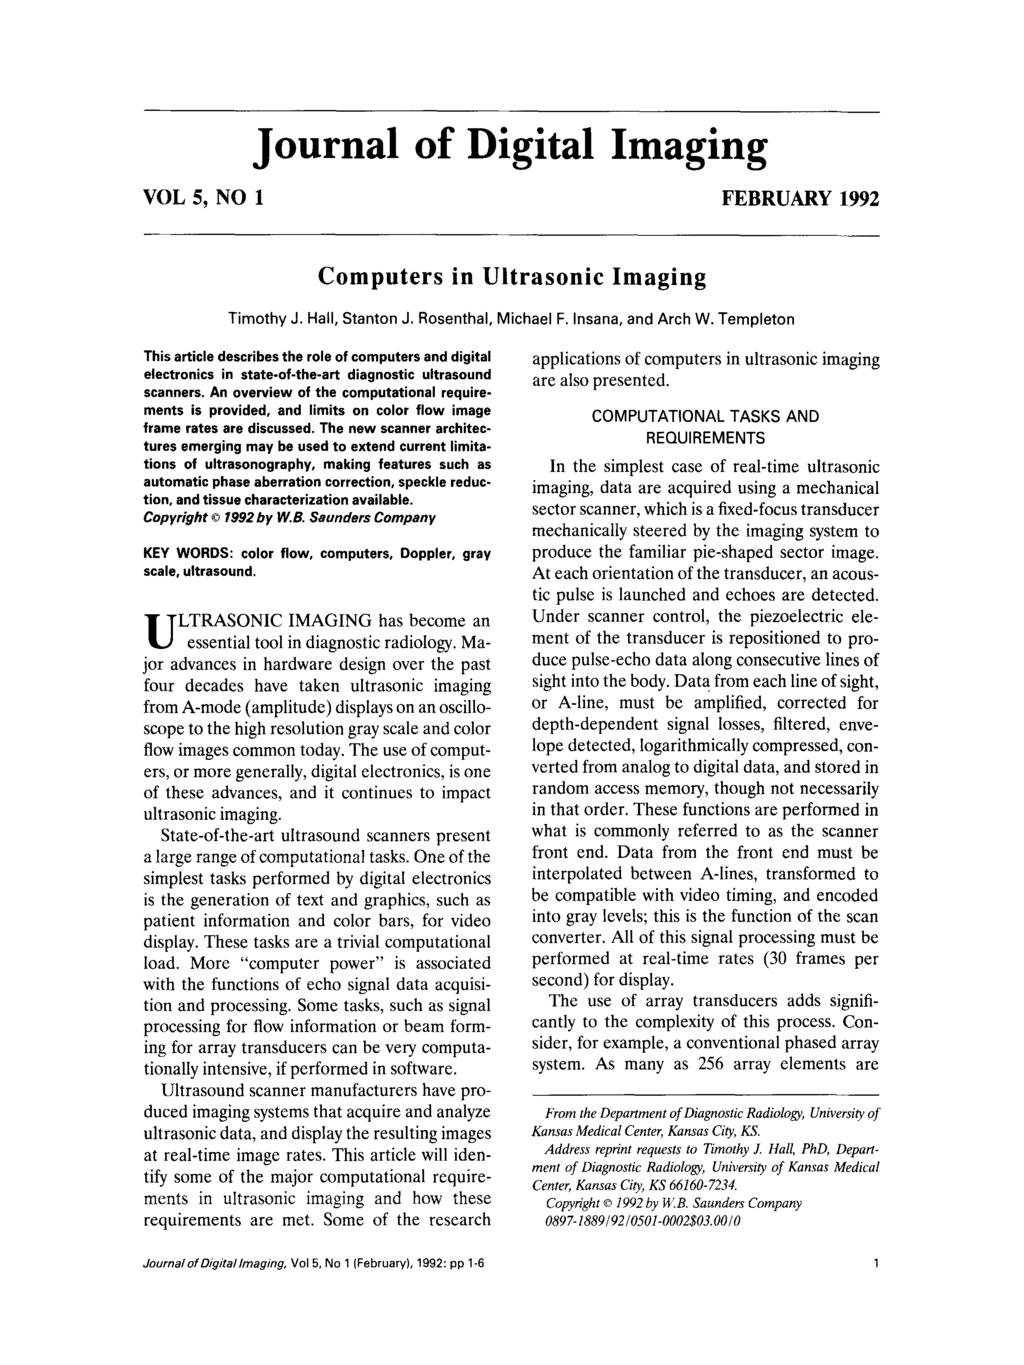 Journal of Digital Imaging VOL 5, NO 1 FEBRUARY 1992 Computers in Ultrasonic Imaging Timothy J. Hall, Stanton J. Rosenthal, Michael F. Insana, and Arch W.